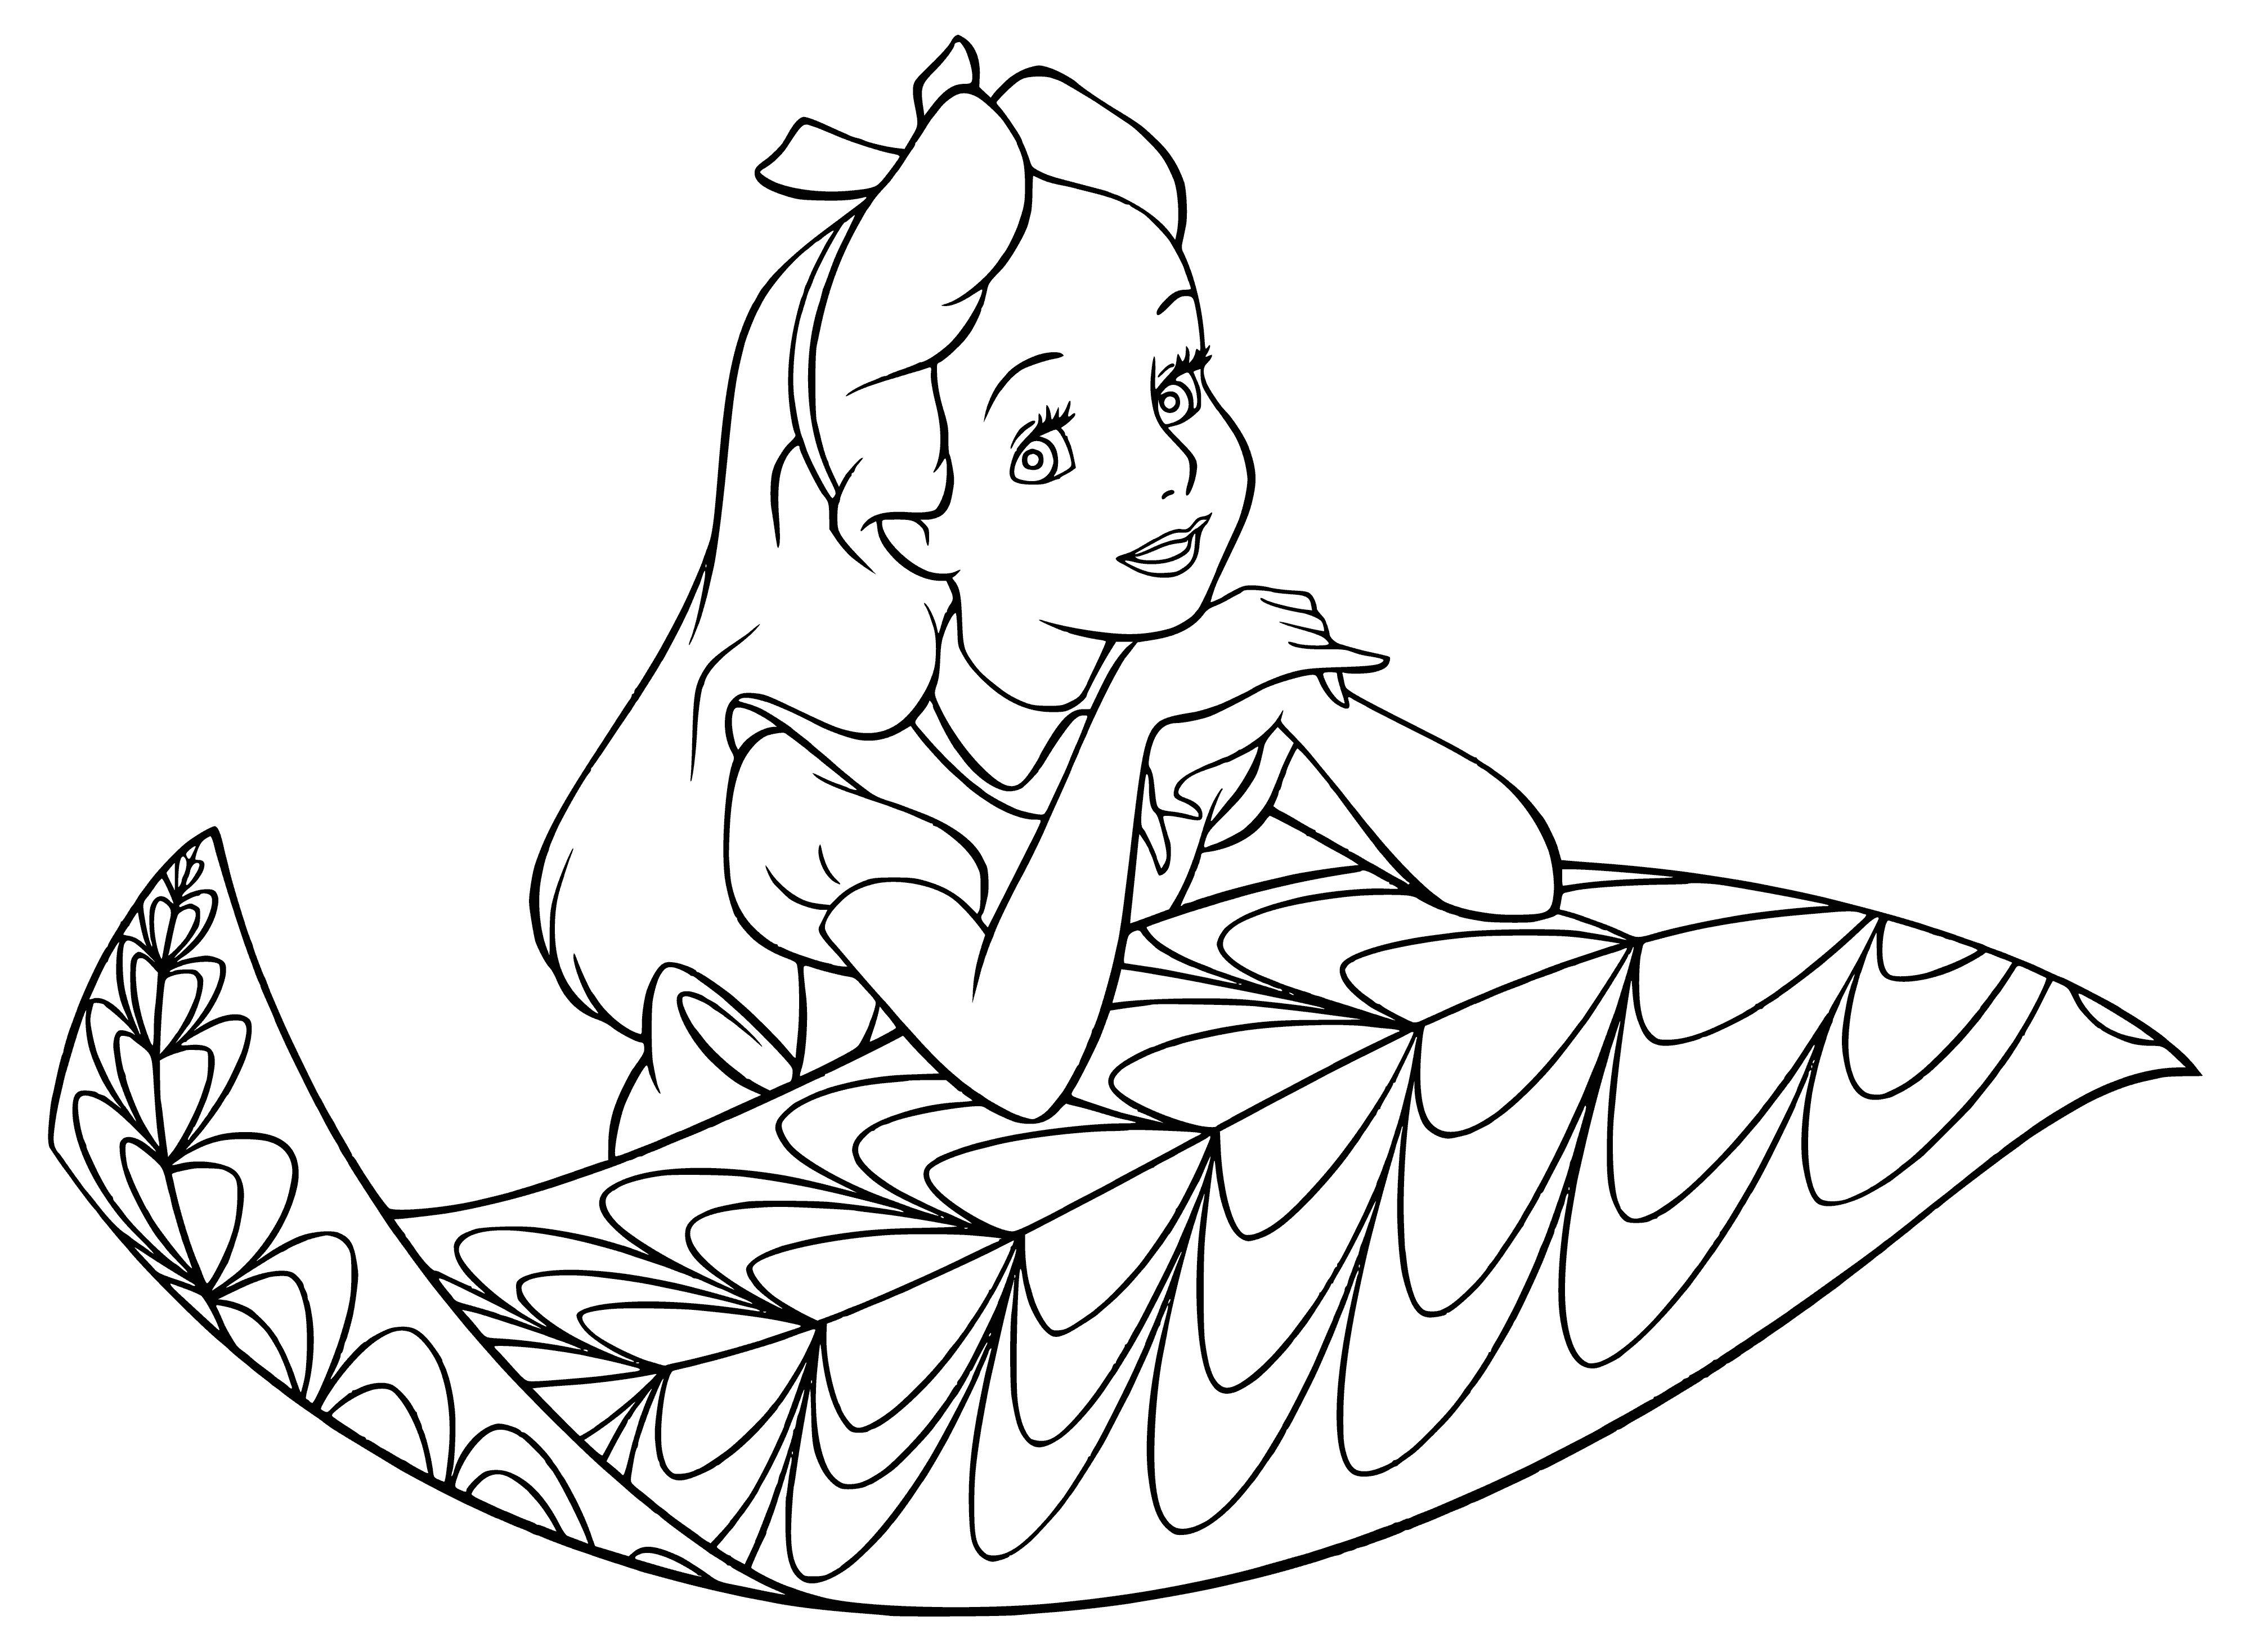 coloring page: Alice holds key, curious & excited, standing in front of large door.